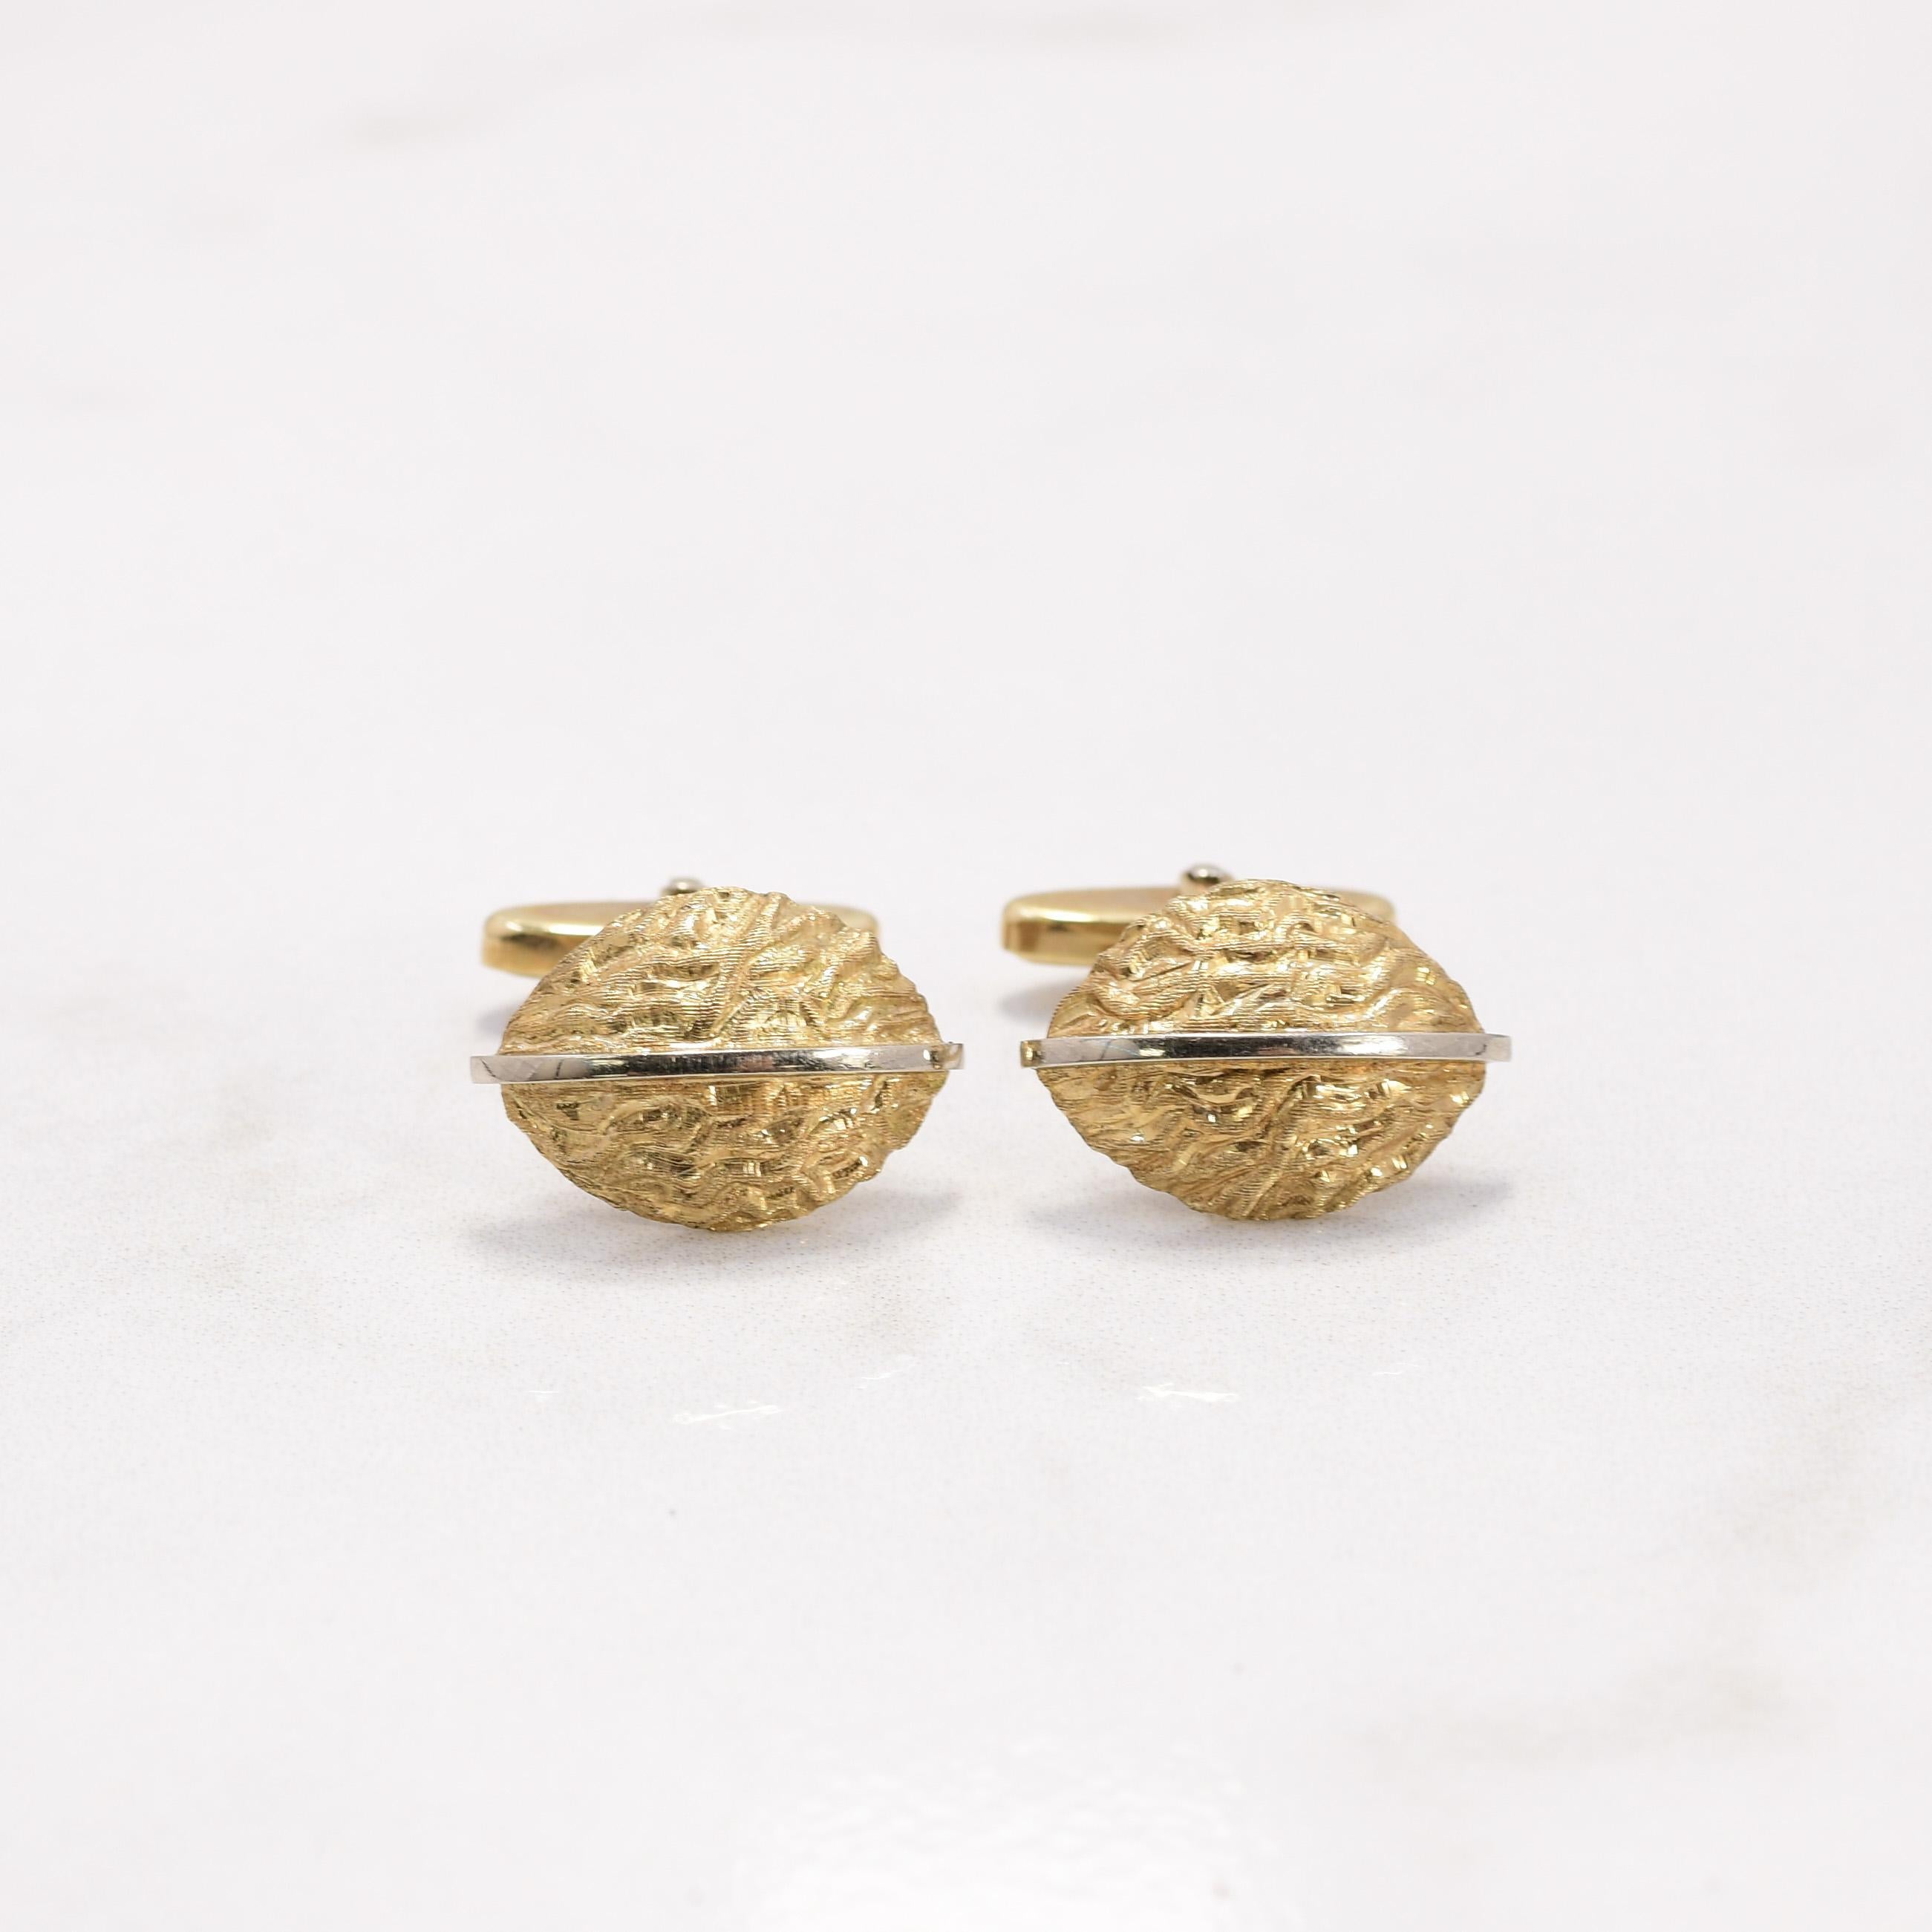 Nutmeg Form 14k Gold Cufflinks In Good Condition For Sale In Addison, TX